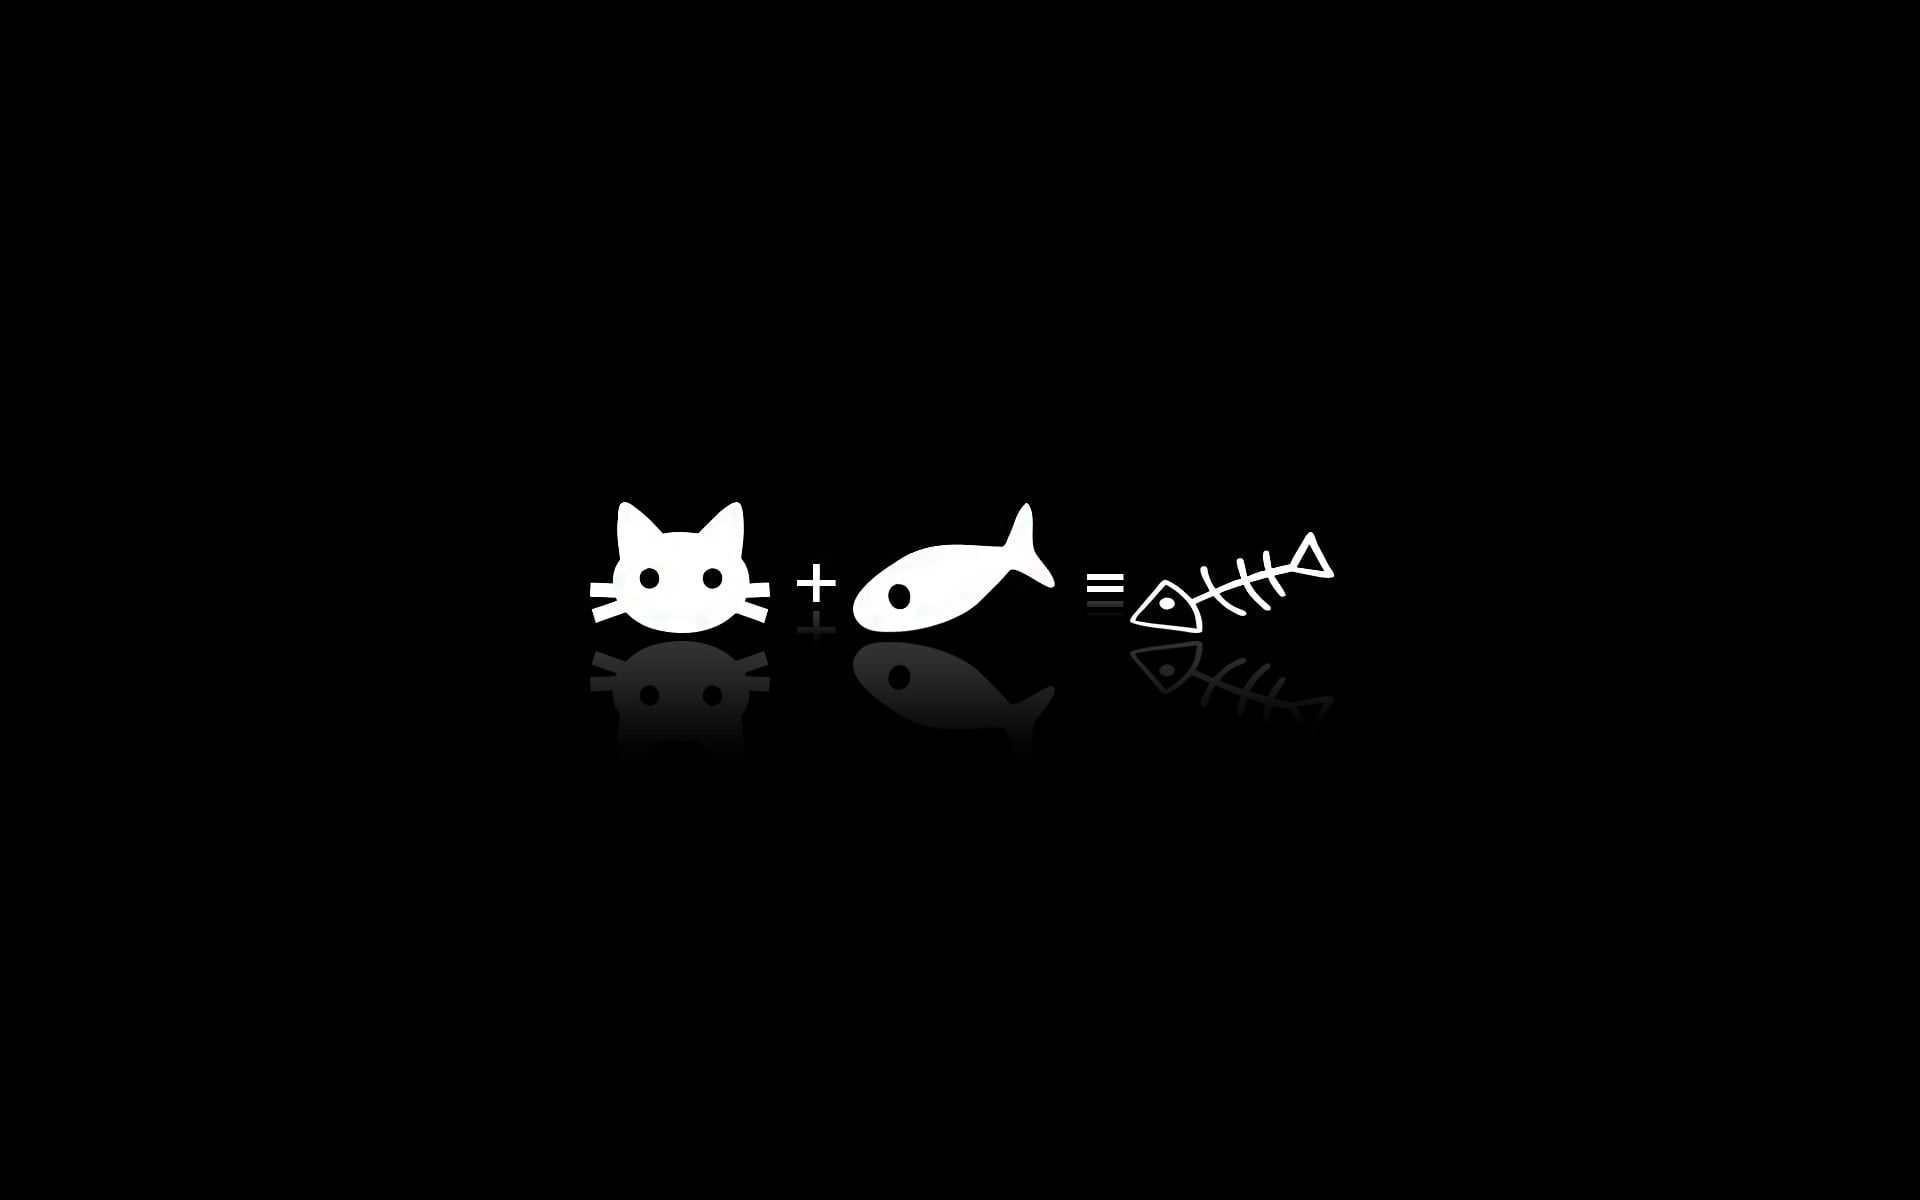 White Fish And Cat Illustration Minimalism Black Cat Humor Hd Images, Photos, Reviews